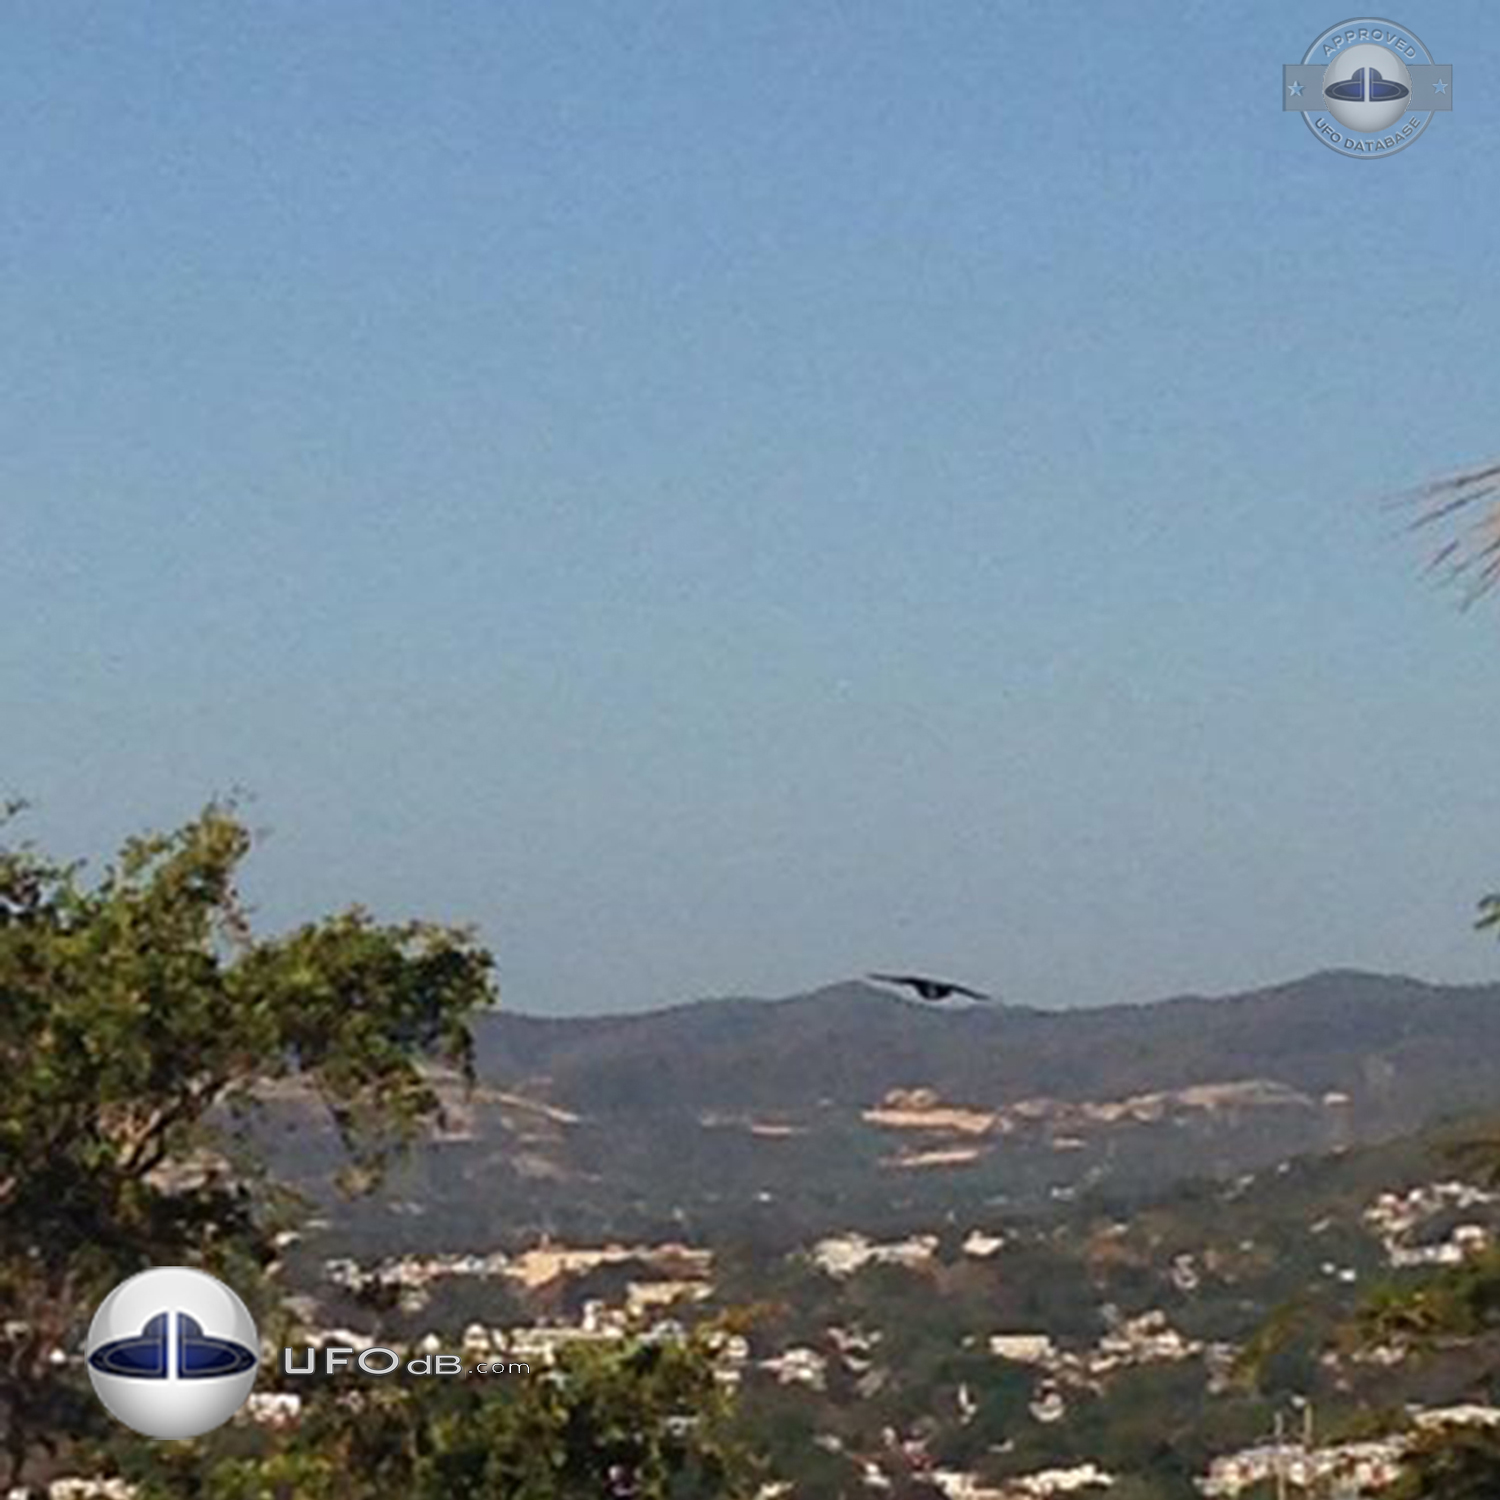 UFO is stationary above a walmart over Ponce in Puerto Rico March 2015 UFO Picture #667-1